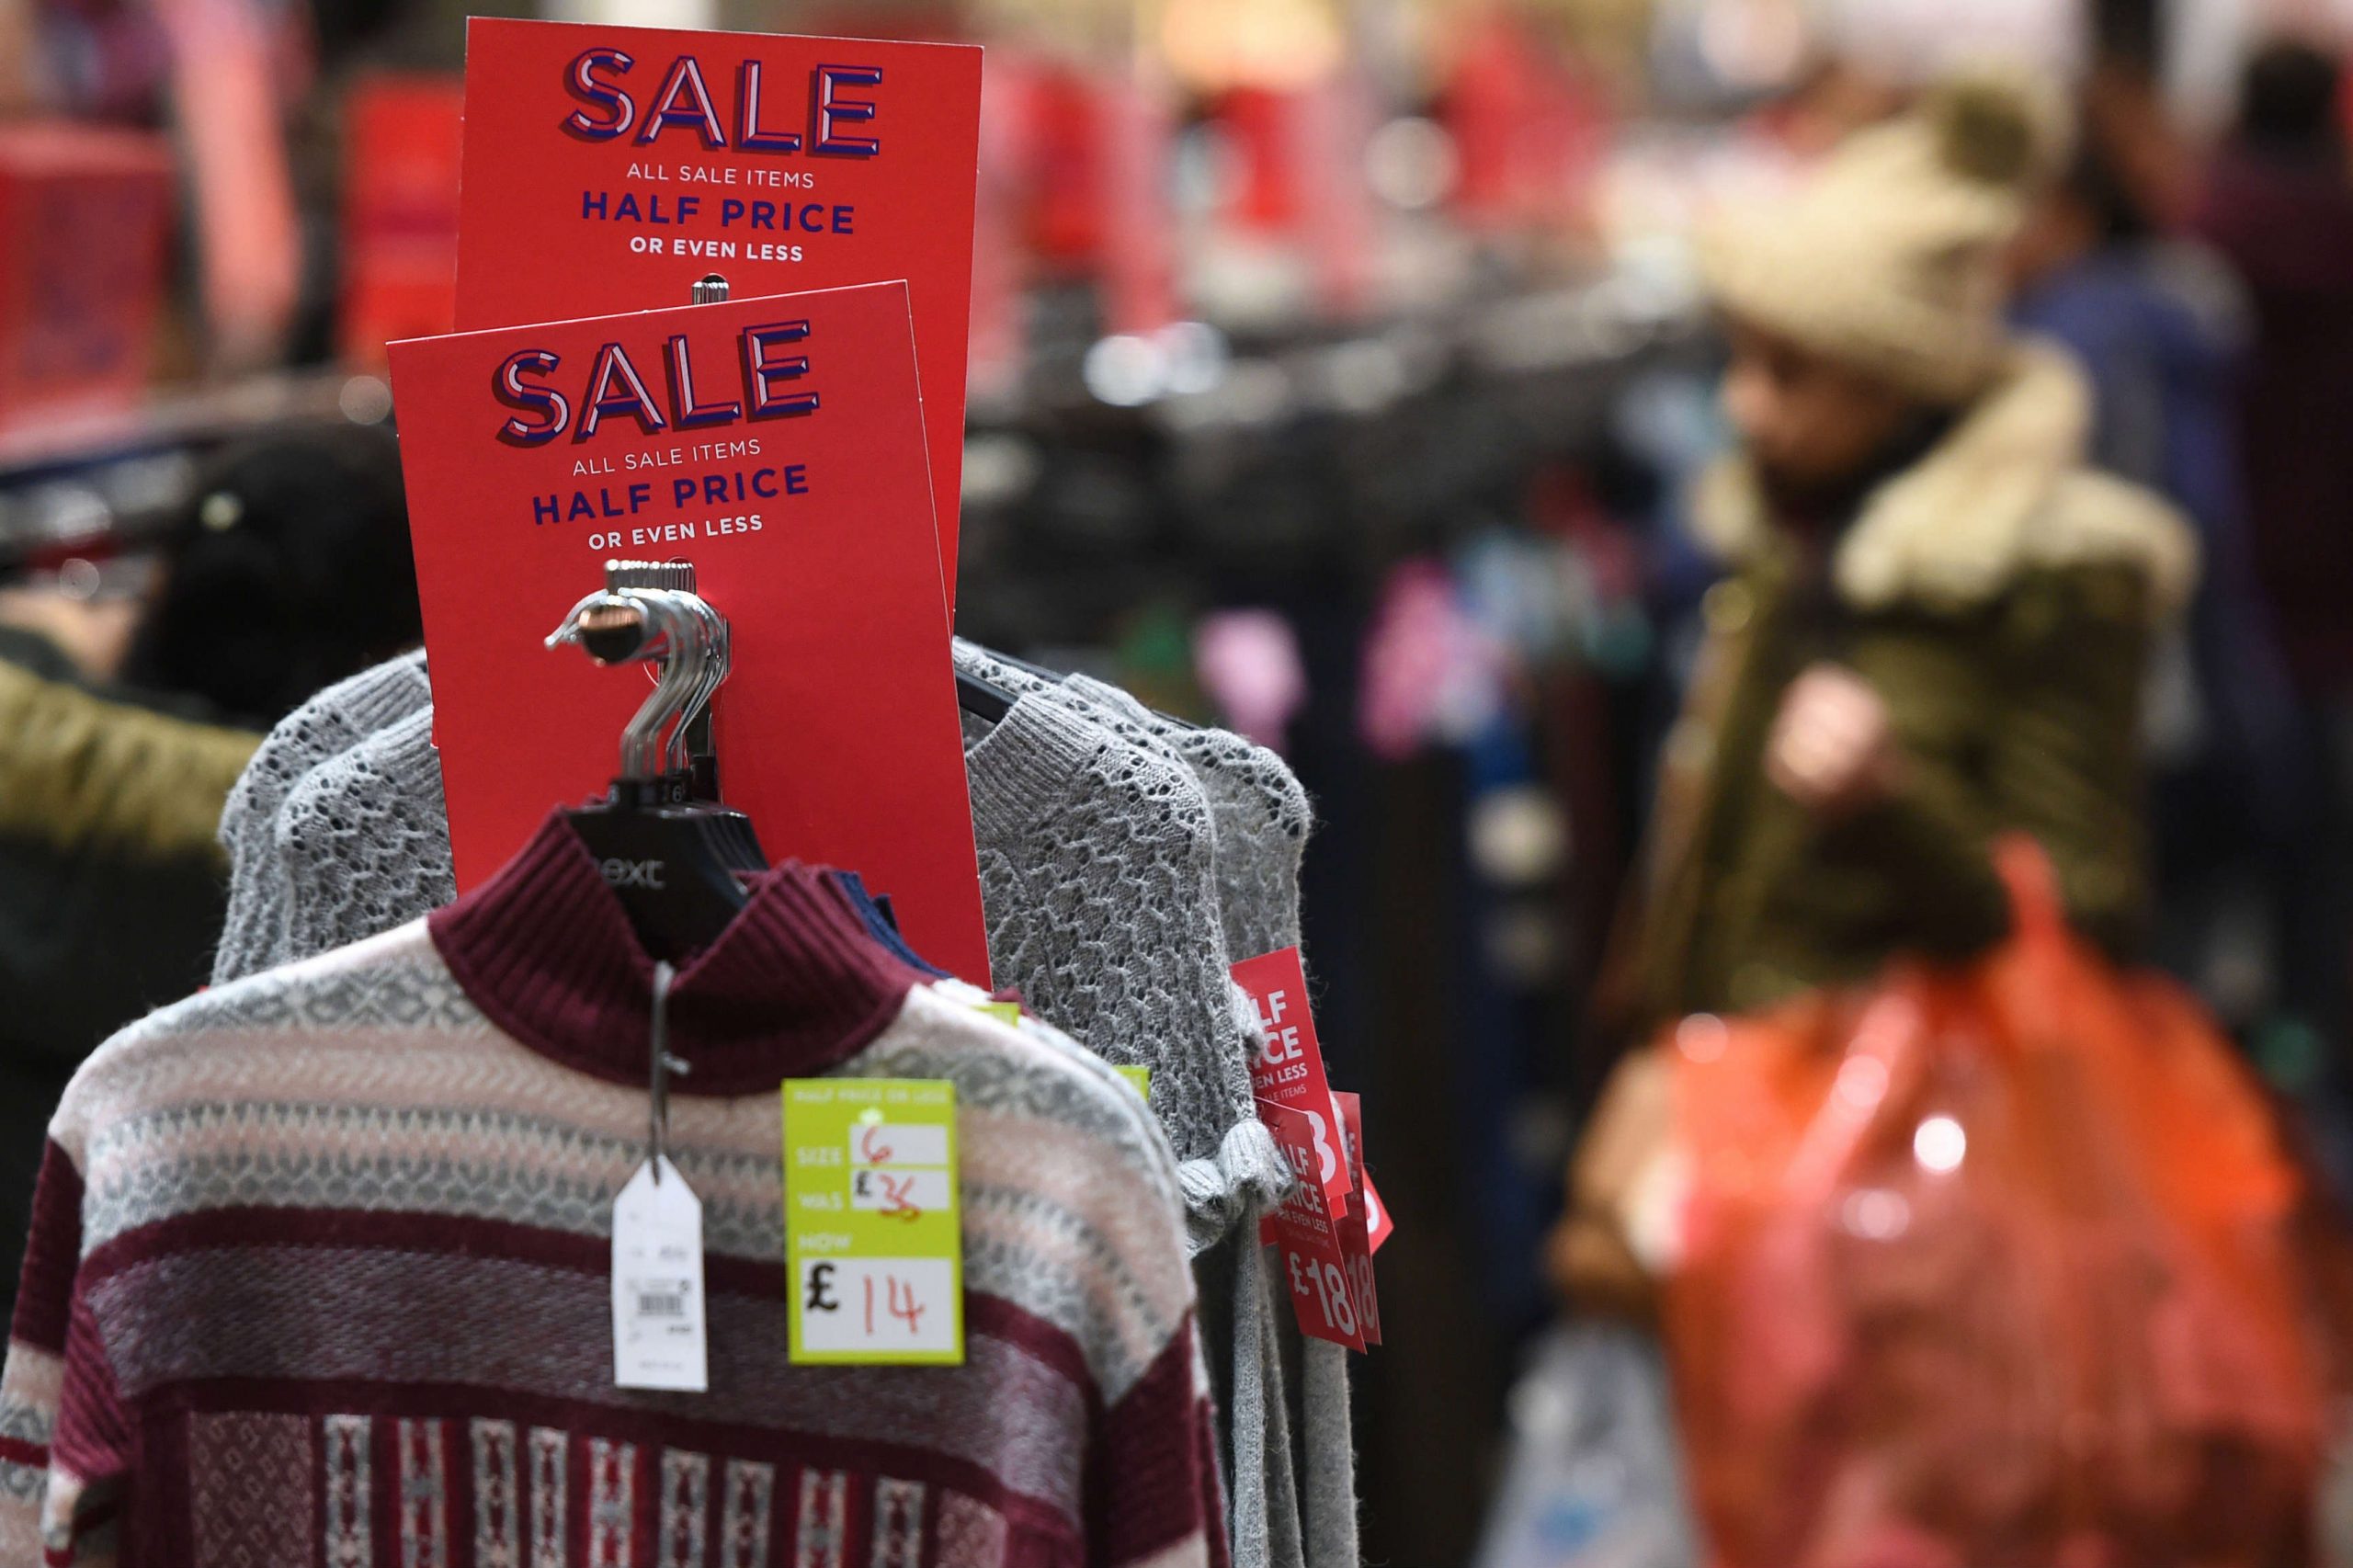 Fashion prices a key driver in doubling of UK inflation